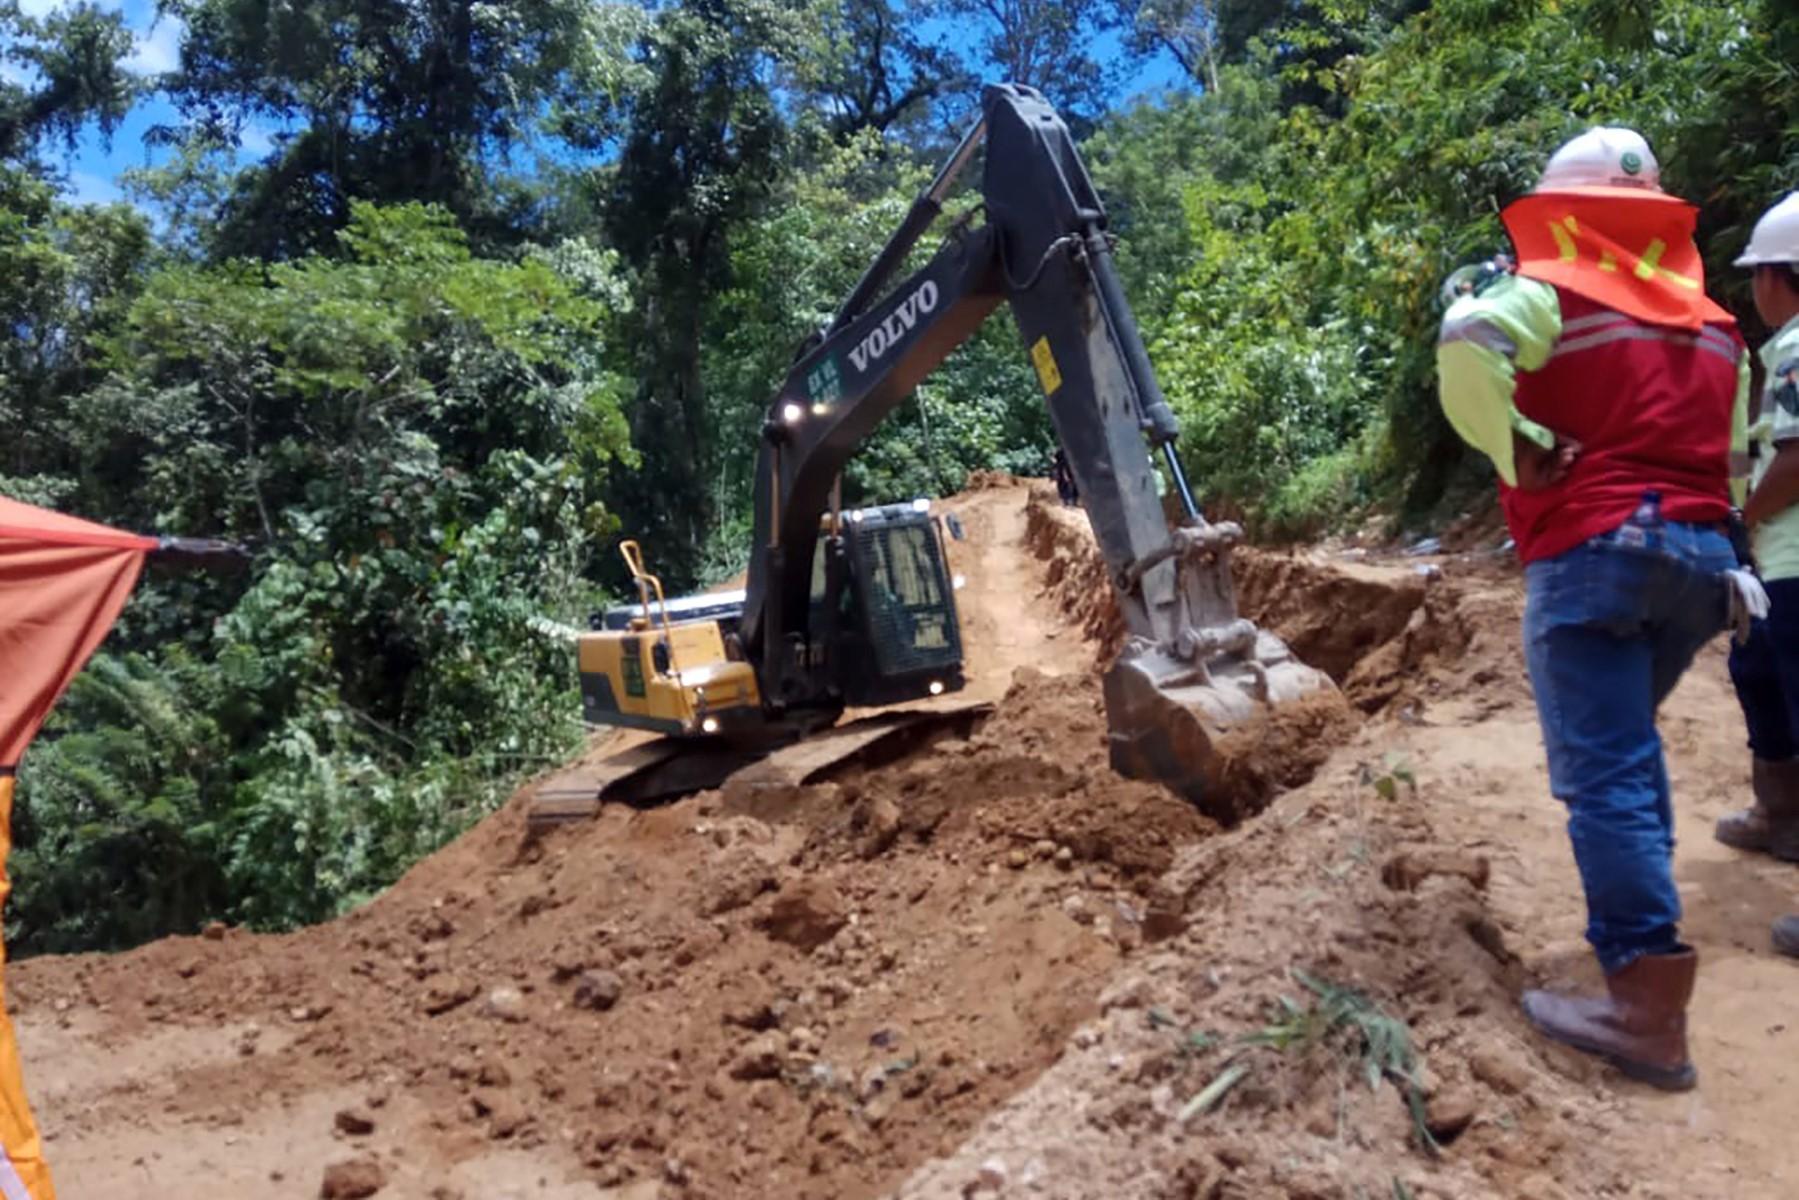 This handout picture taken and released on March 4, 2019 by Indonesia's Badan Nasional Penanggulangan Bencana, the country's disaster mitigation agency, shows rescuers continuing operations in an attempt to reach trapped miners after the Feb 26, 2019 landslide at an illegal gold mine in the Bolaang Mongondow region of North Sulawesi. Photo: AFP